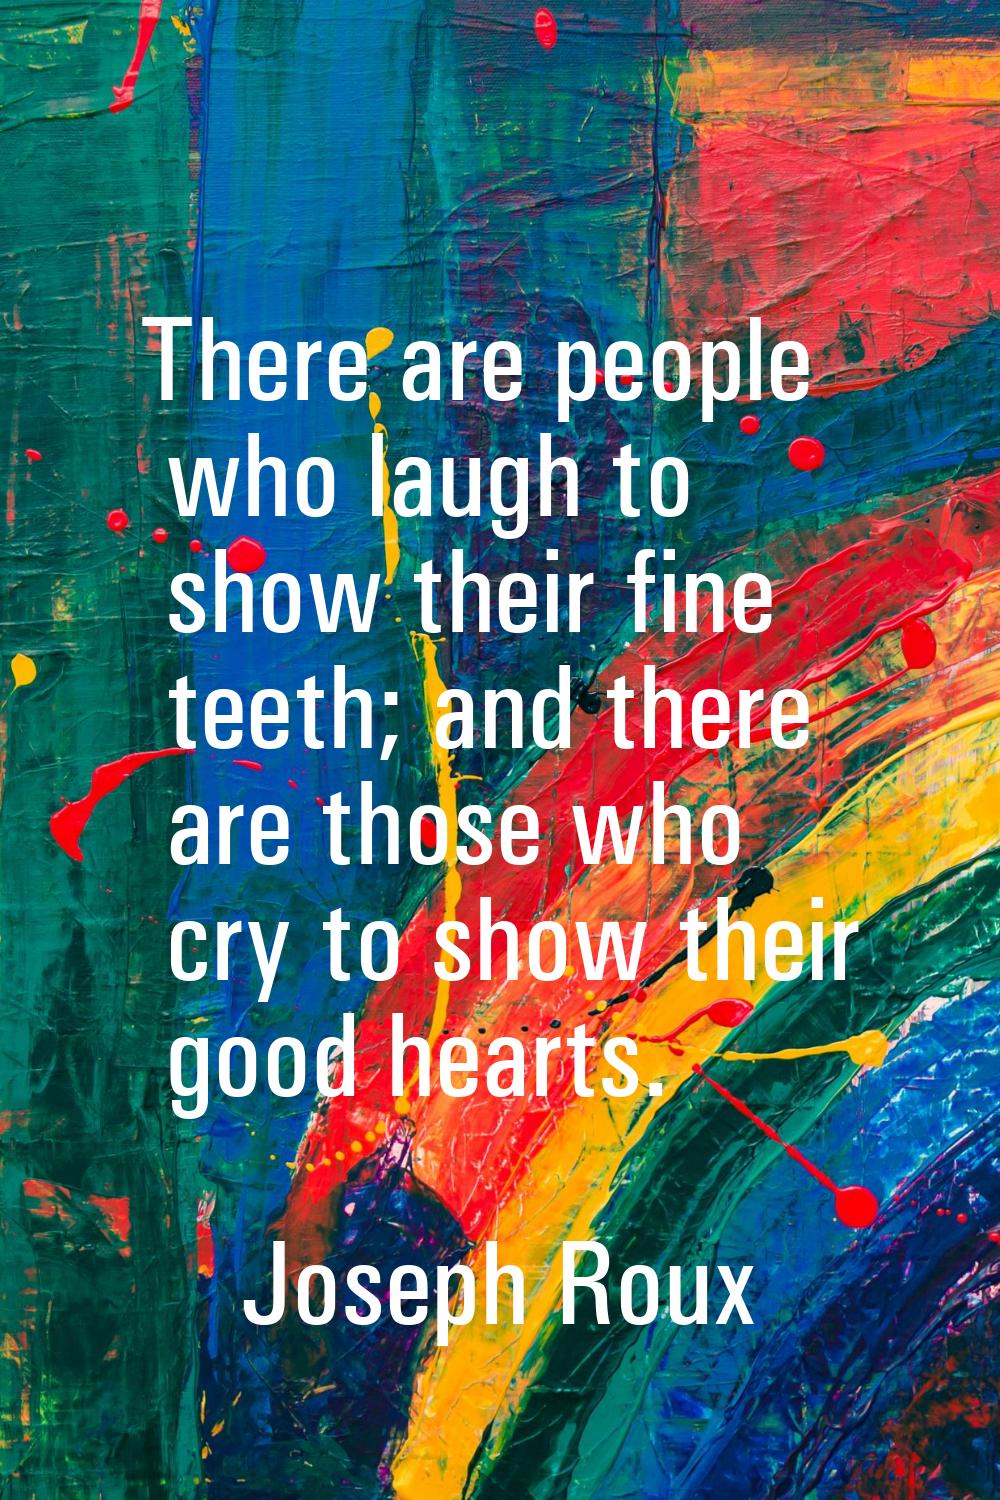 There are people who laugh to show their fine teeth; and there are those who cry to show their good